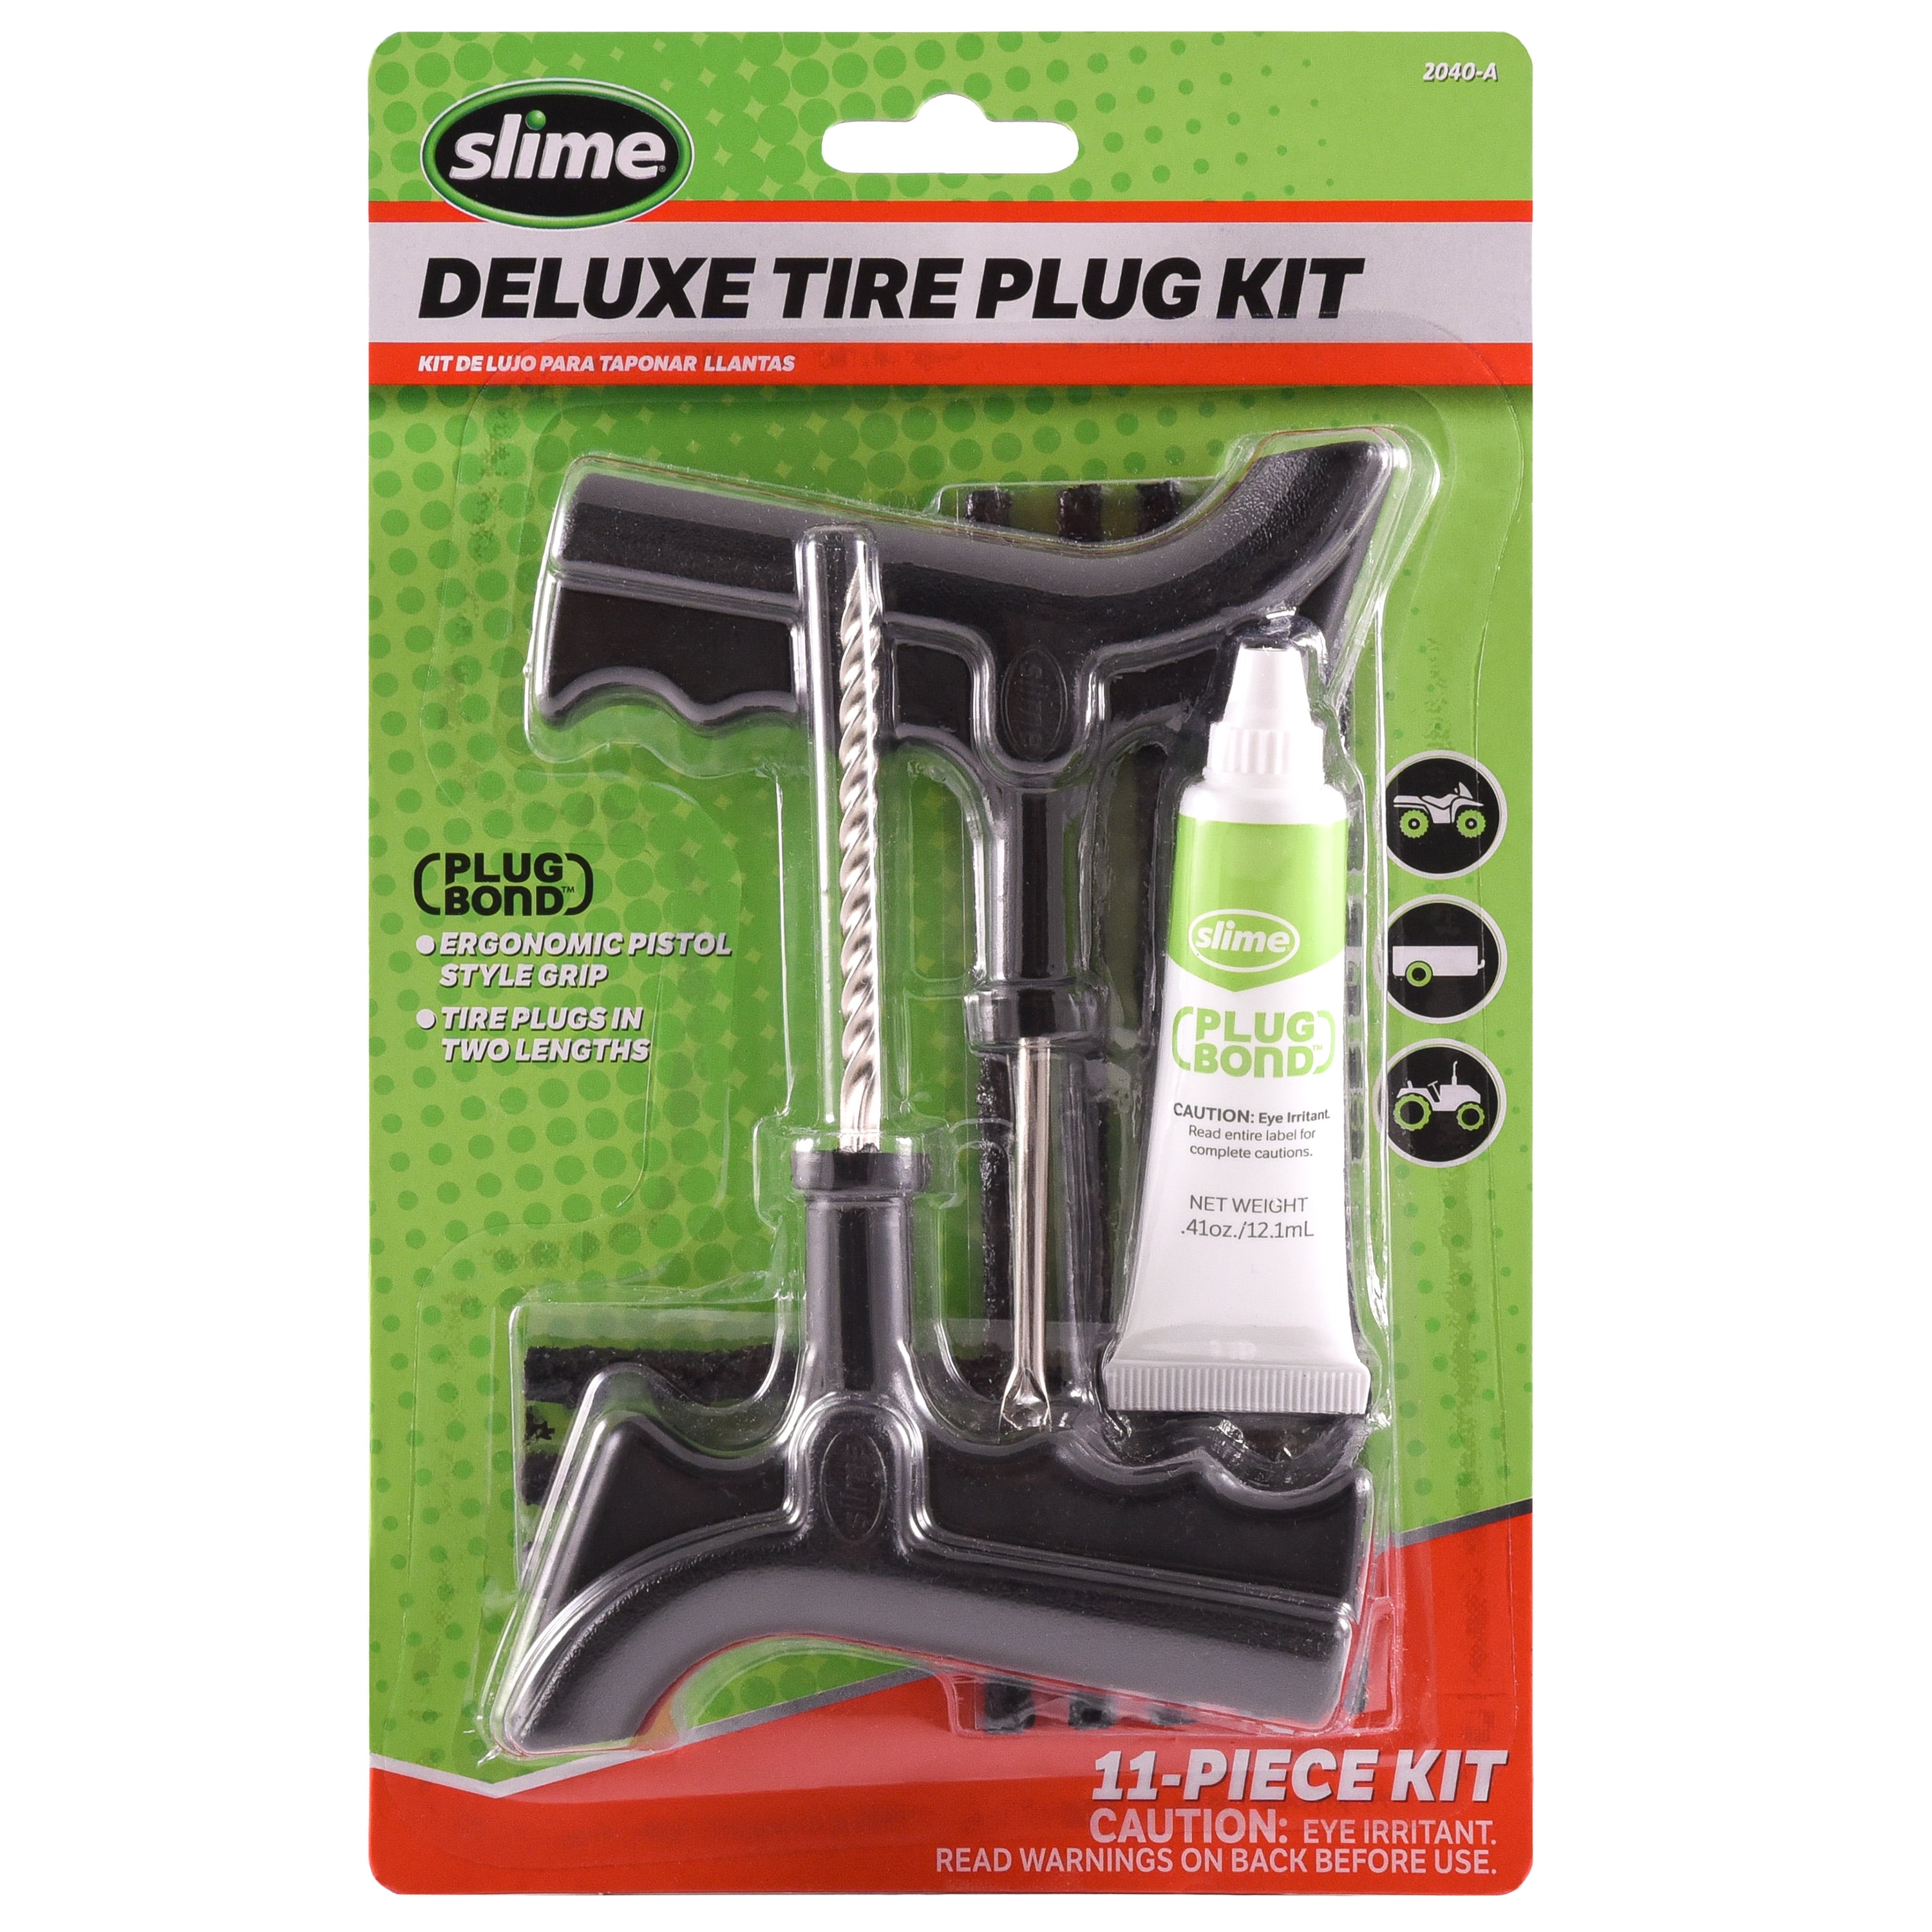 Slime 11-Piece Deluxe Tire Plug Kit with Plug Bond - 2040-a